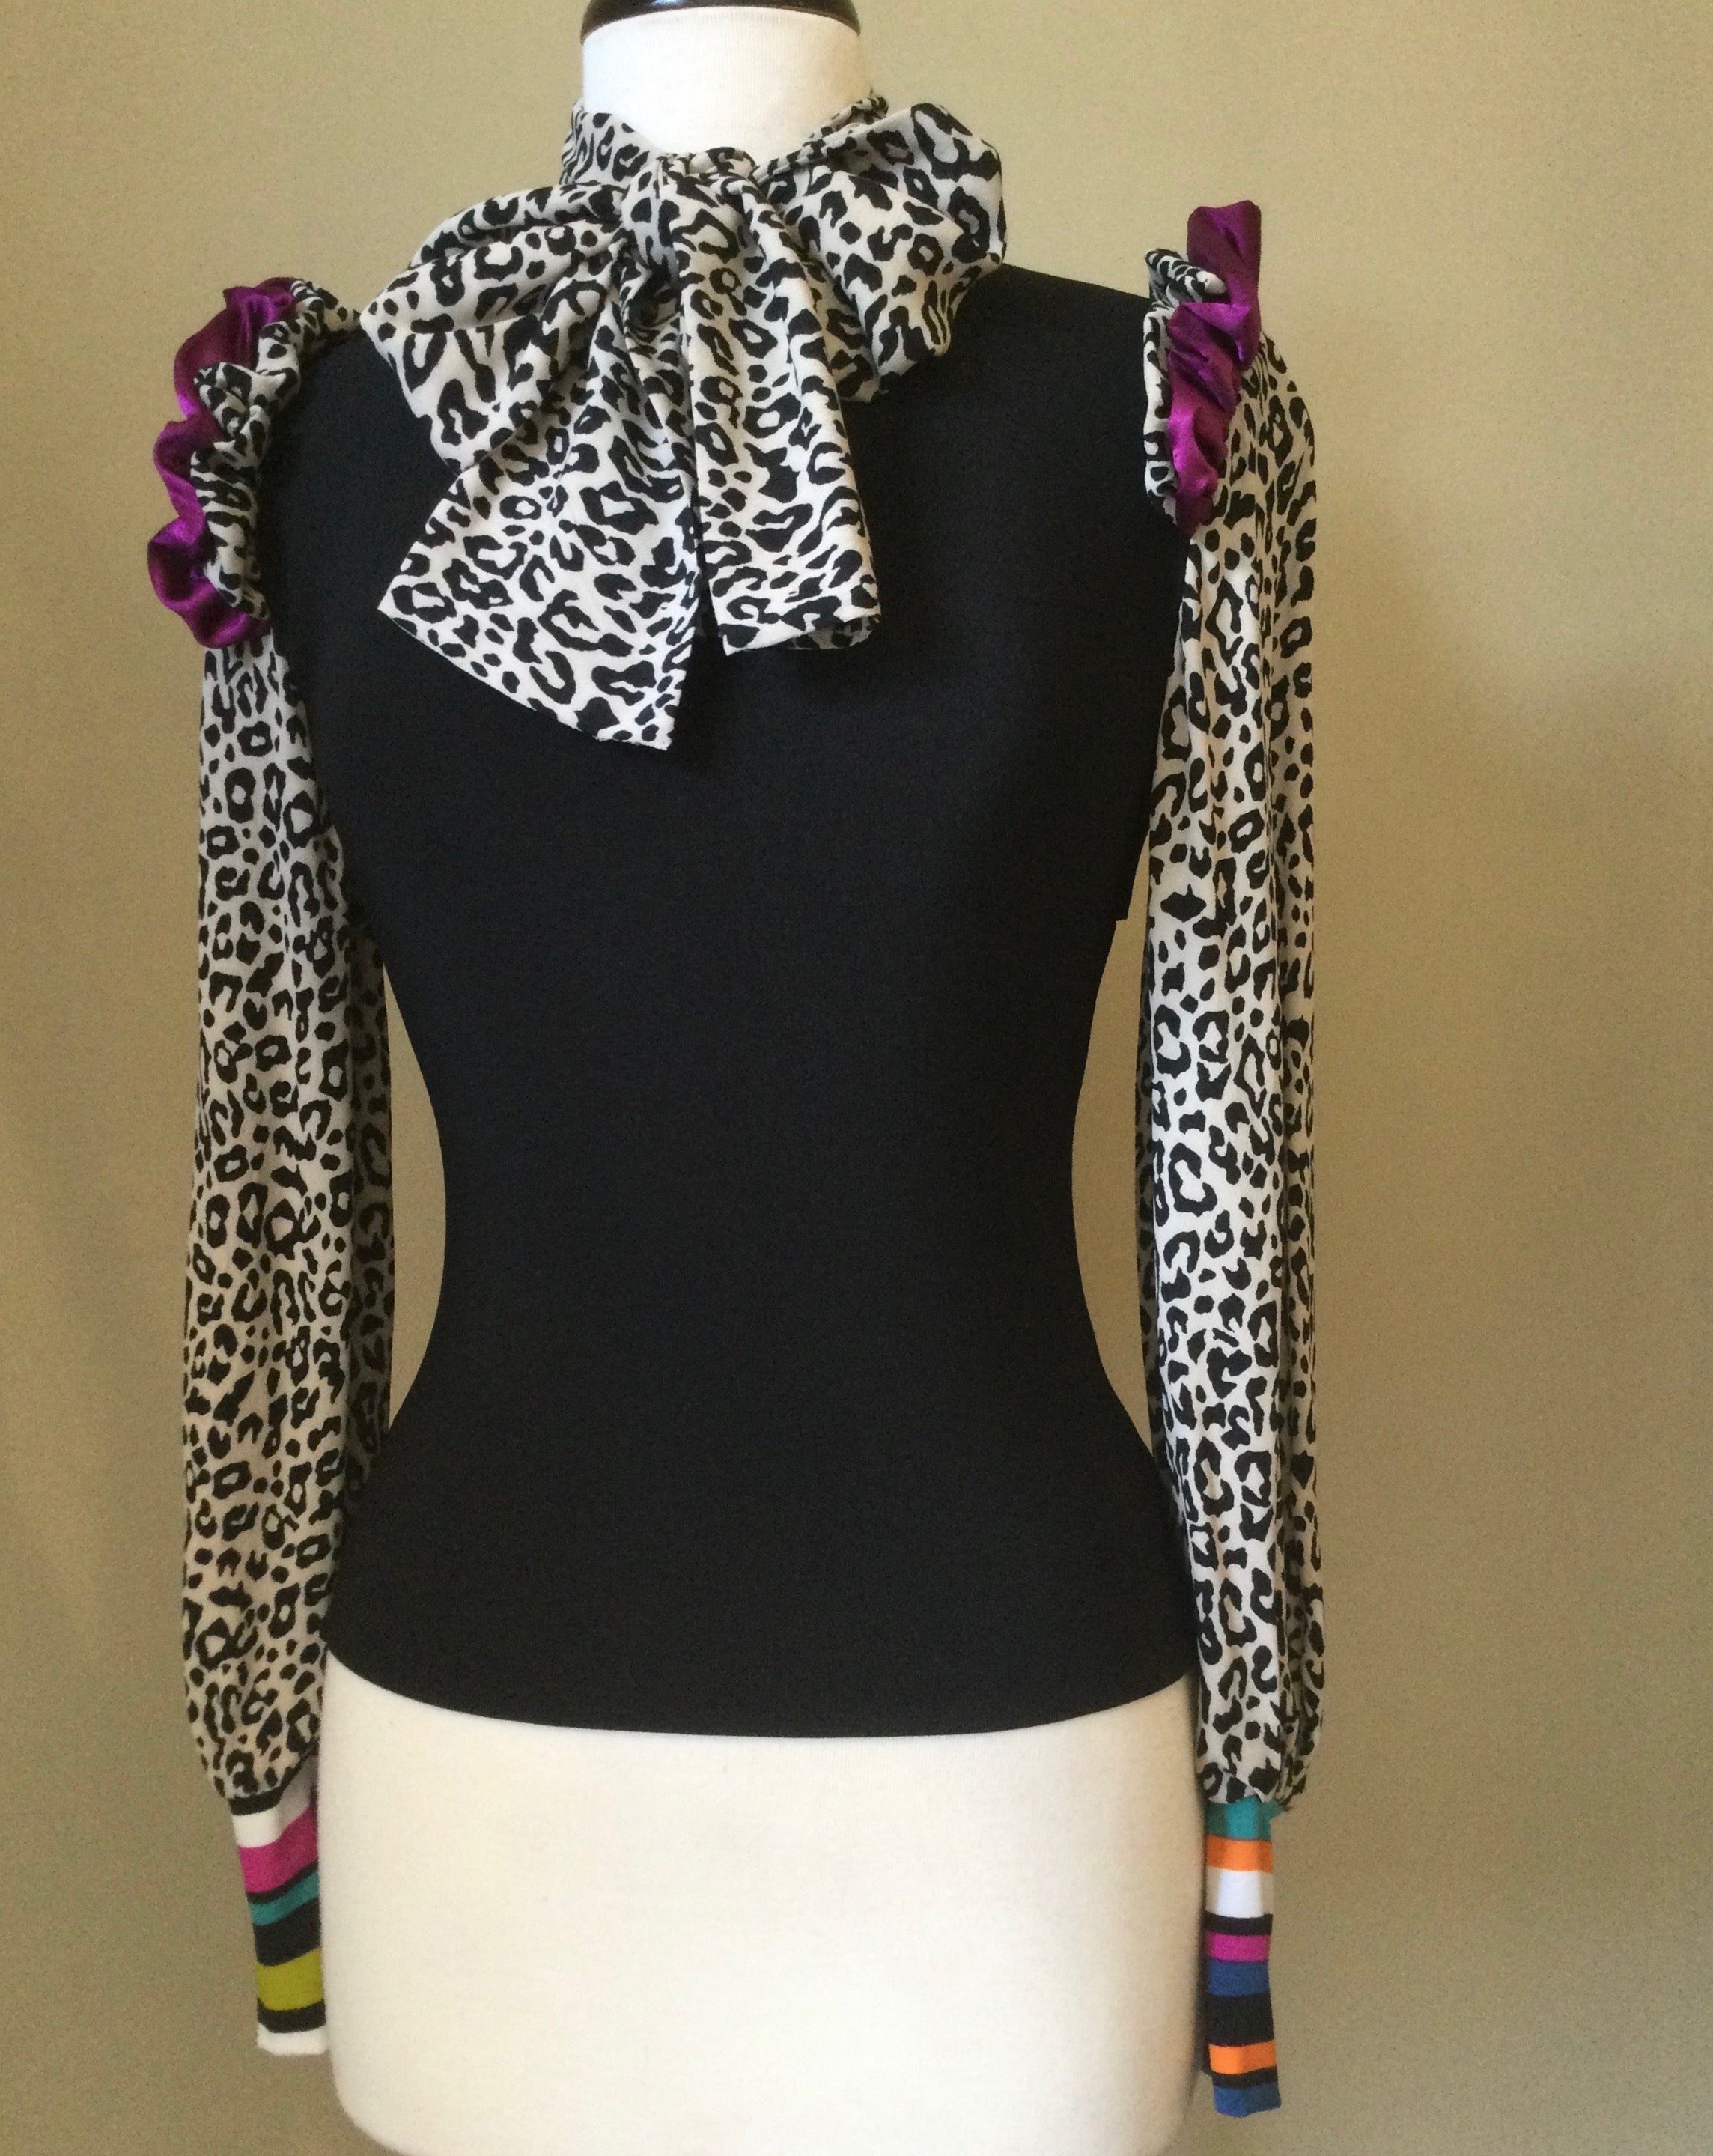 Jersey and Chiffon Tie Collar Top